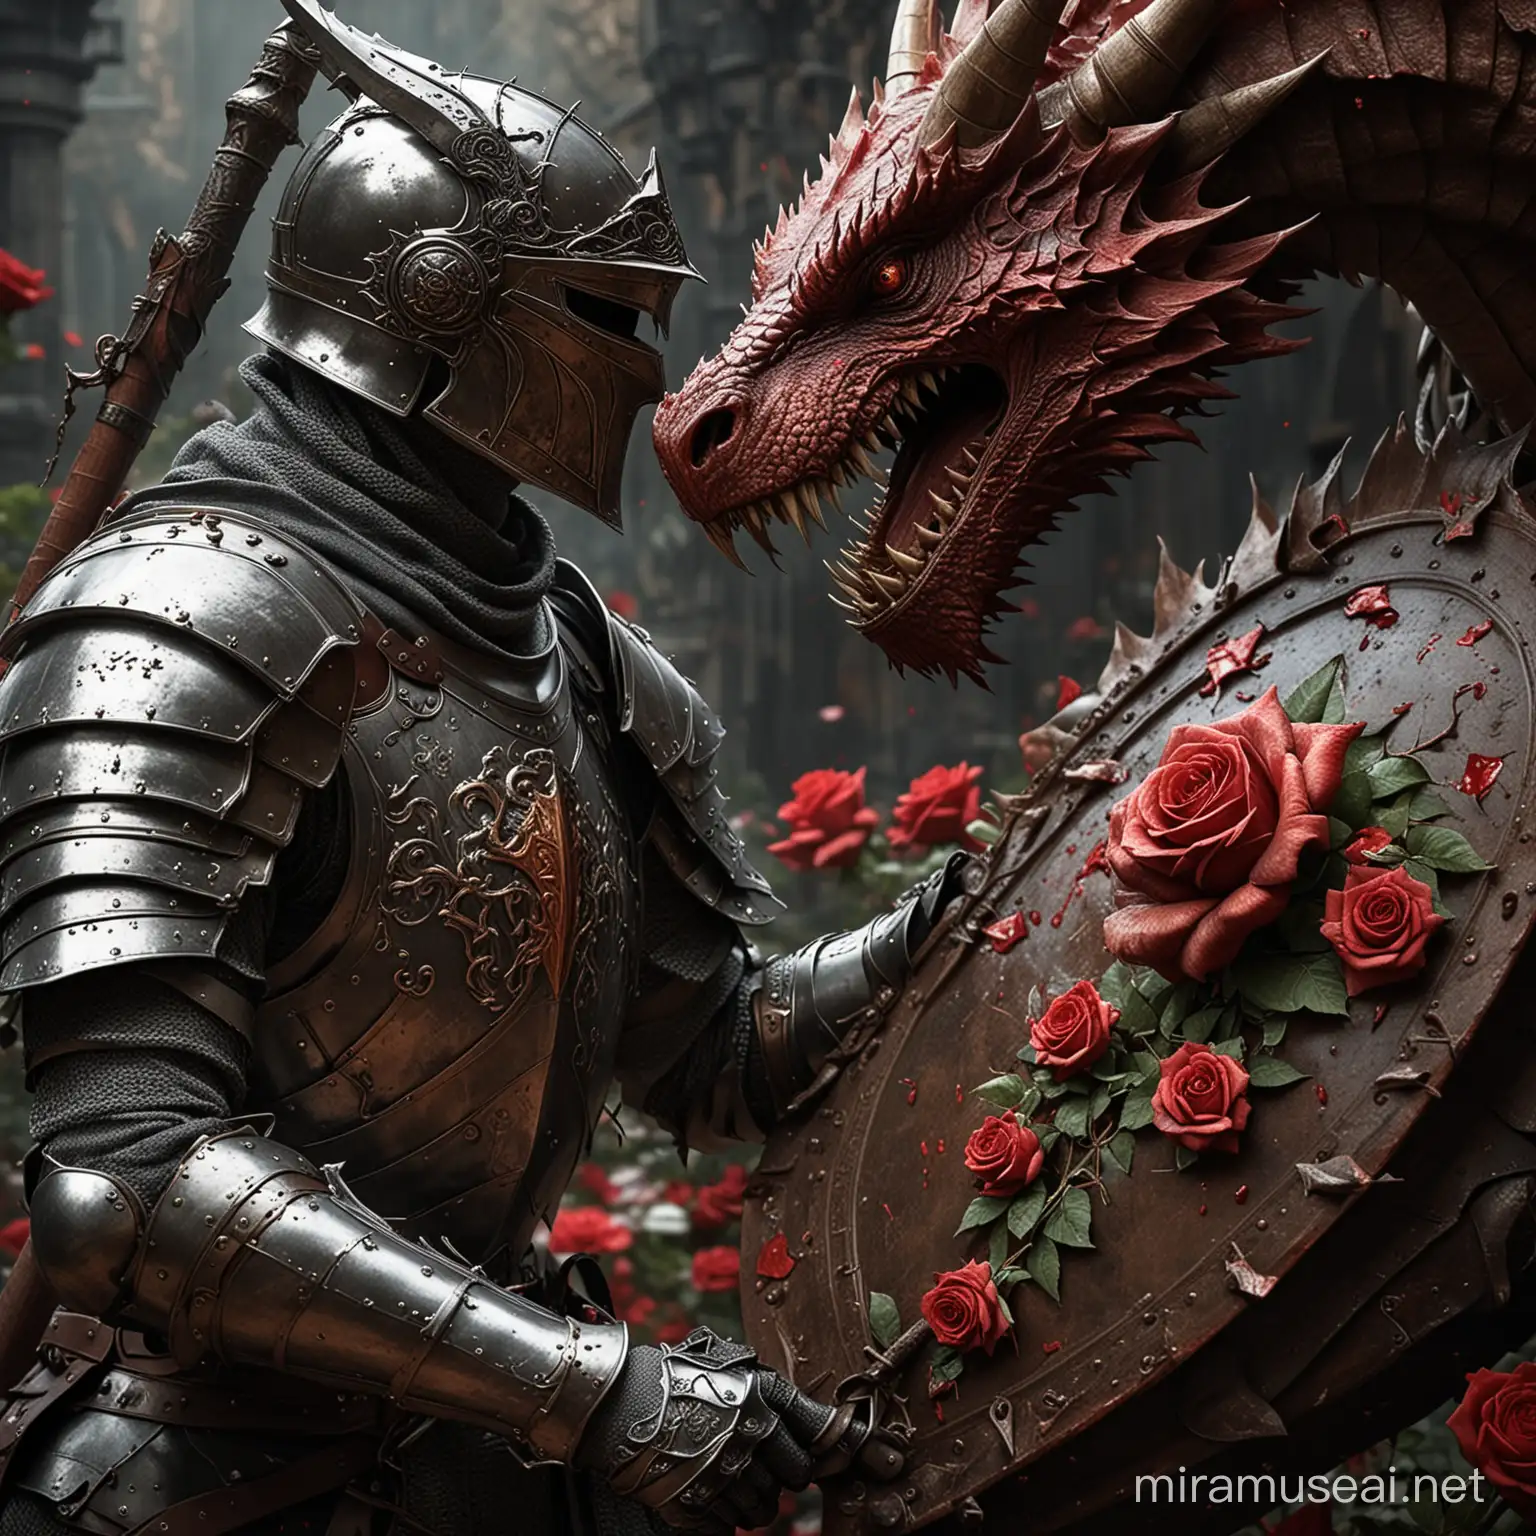 A realistic portrayal of a knight clad in full armor, his visage obscured by a helmet, engaged in combat with a colossal dragon to rescue a princess. The knight proudly bears the emblem of a rose on his shield, while from a wound on the dragon's body, a rose blooms from the spilled blood. The image emphasizes the clash of metal and scales, the determination in the knight's eyes, and the delicate beauty of the rose. Photography, using a high-resolution DSLR camera with a 50mm prime lens, capturing the intricate details and textures, --ar 16:9 --v 5